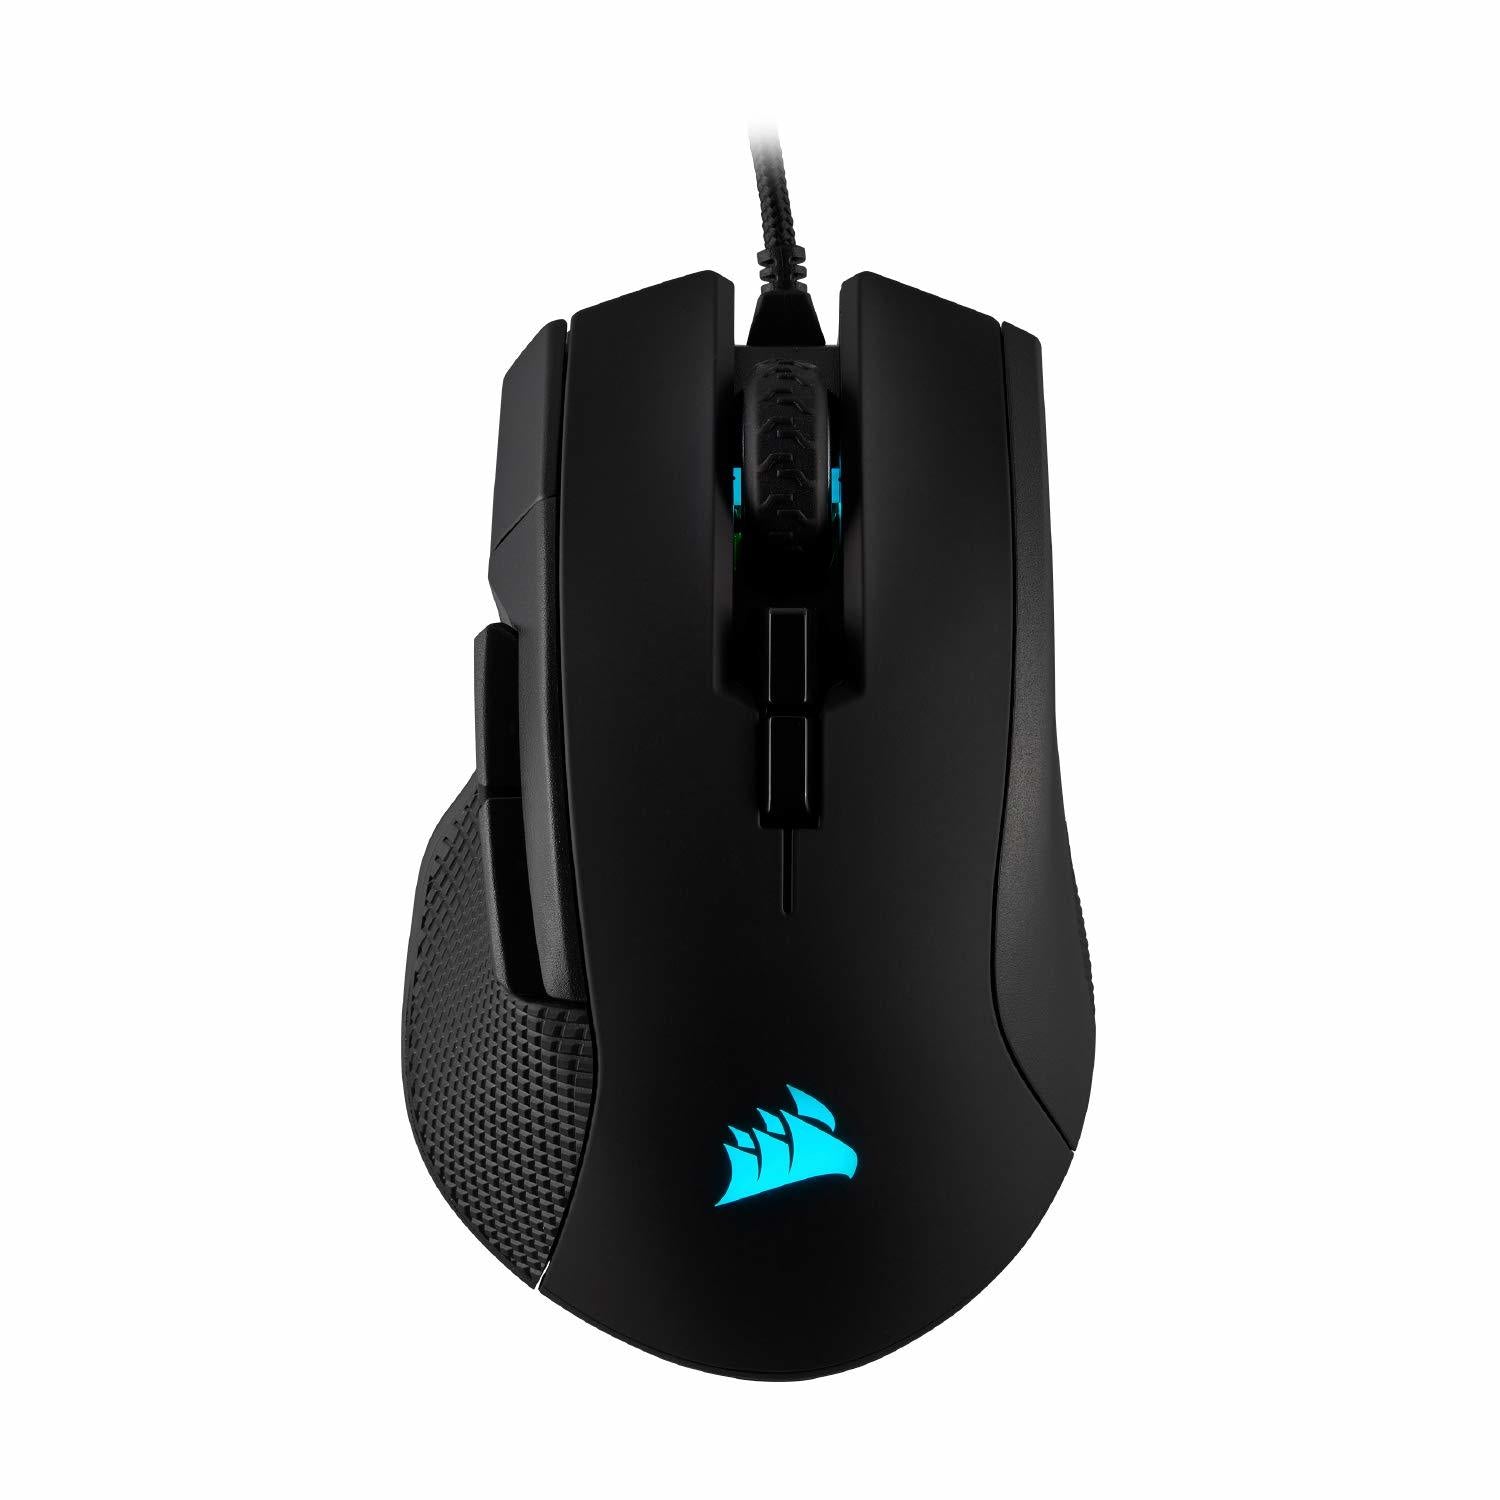 Corsair Ironclaw RGB Optical FPS/MOBA Gaming Mouse - PC Games